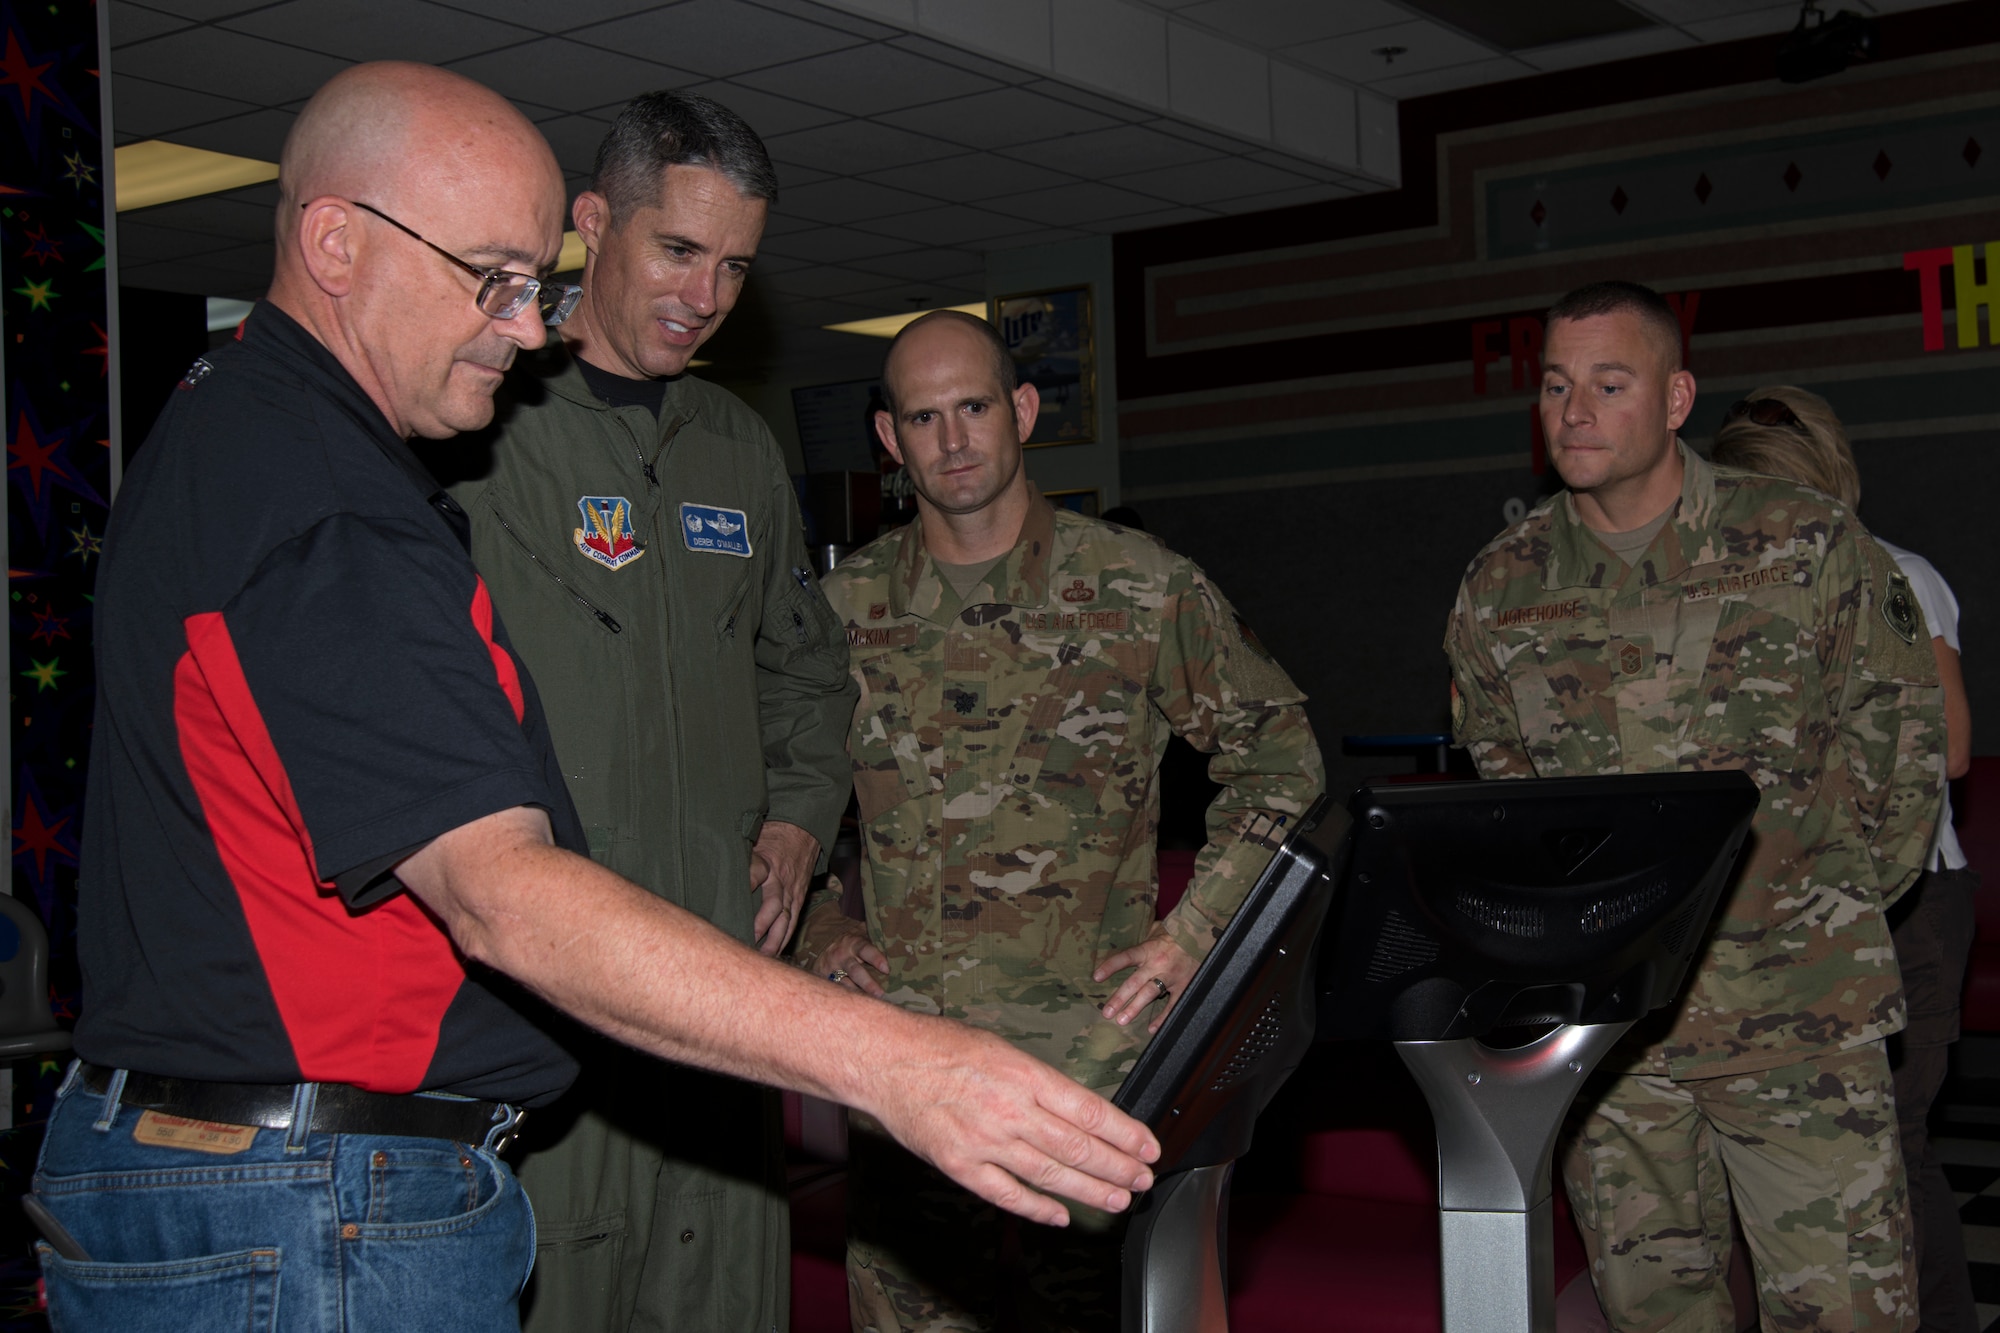 Mike Shore, 20th Force Support Squadron Shaw Lanes Bowling Center assistant manager, shows 20th Fighter Wing leaders how to begin a HyperBowling game at Shaw Air Force Base, South Carolina, July 19, 2019.